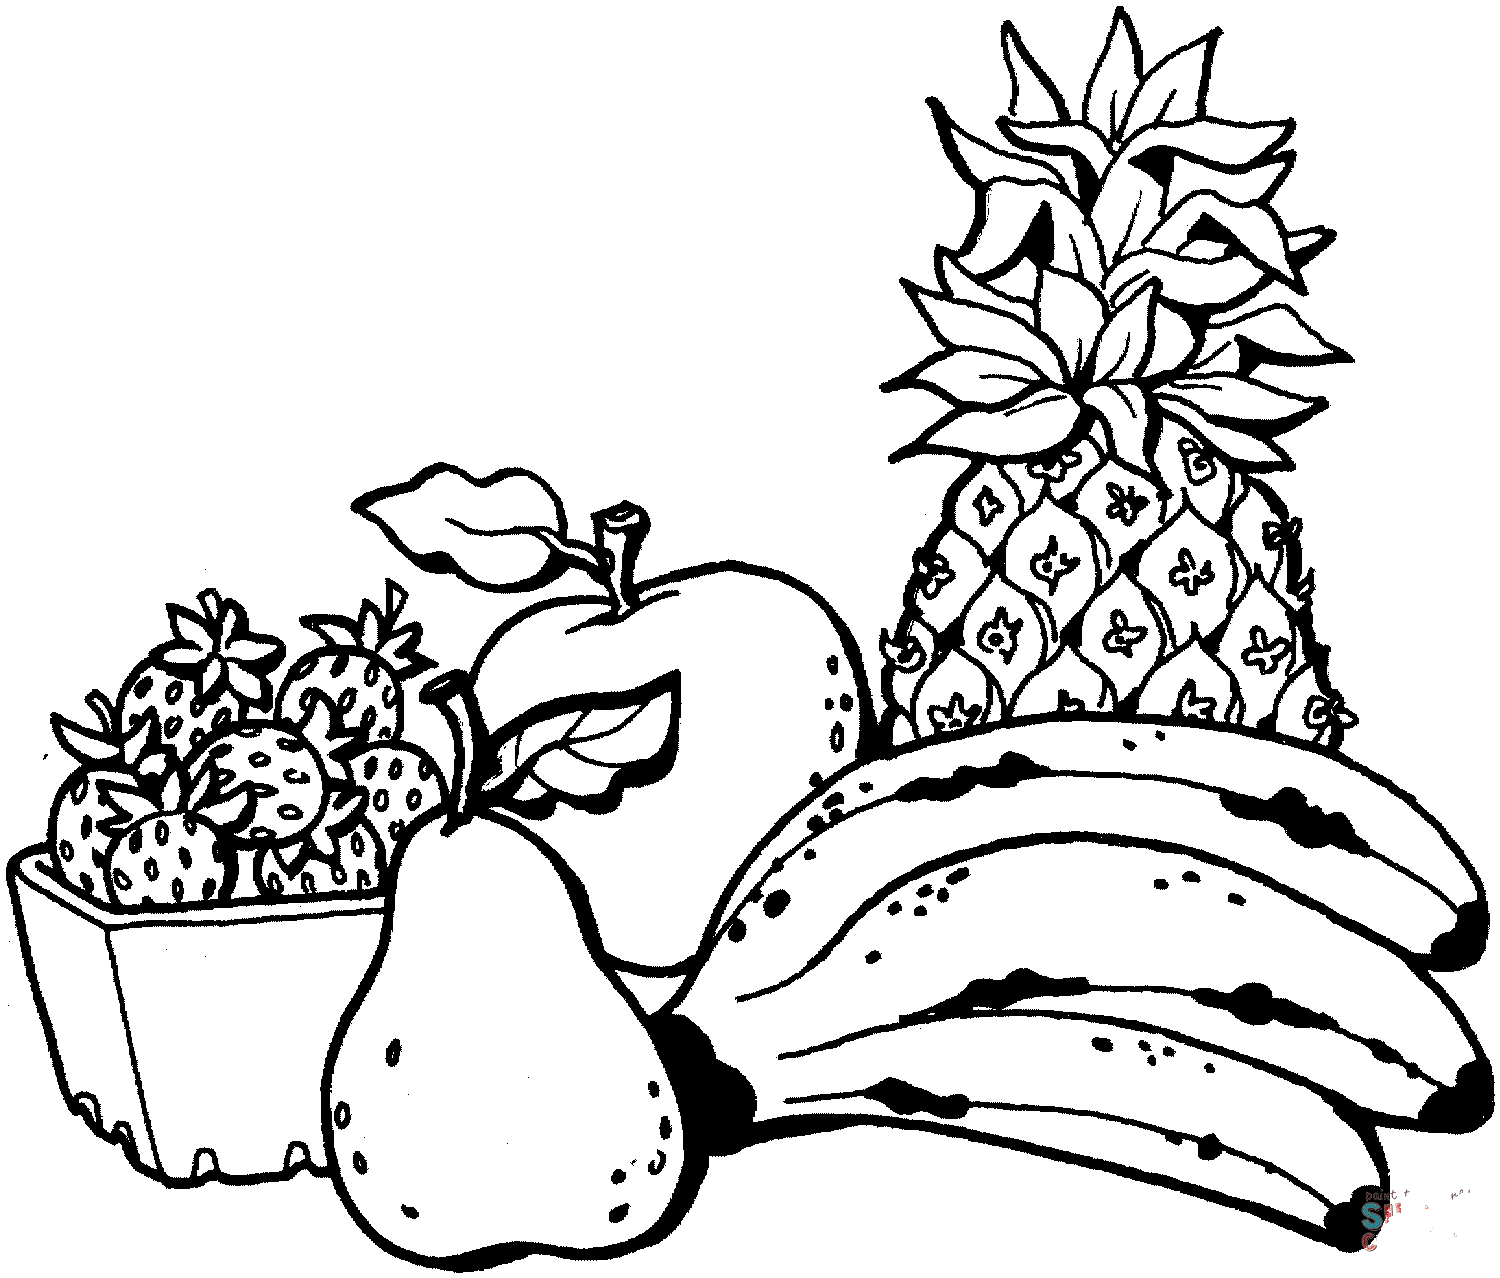 Banana And Some Fruits Coloring Page